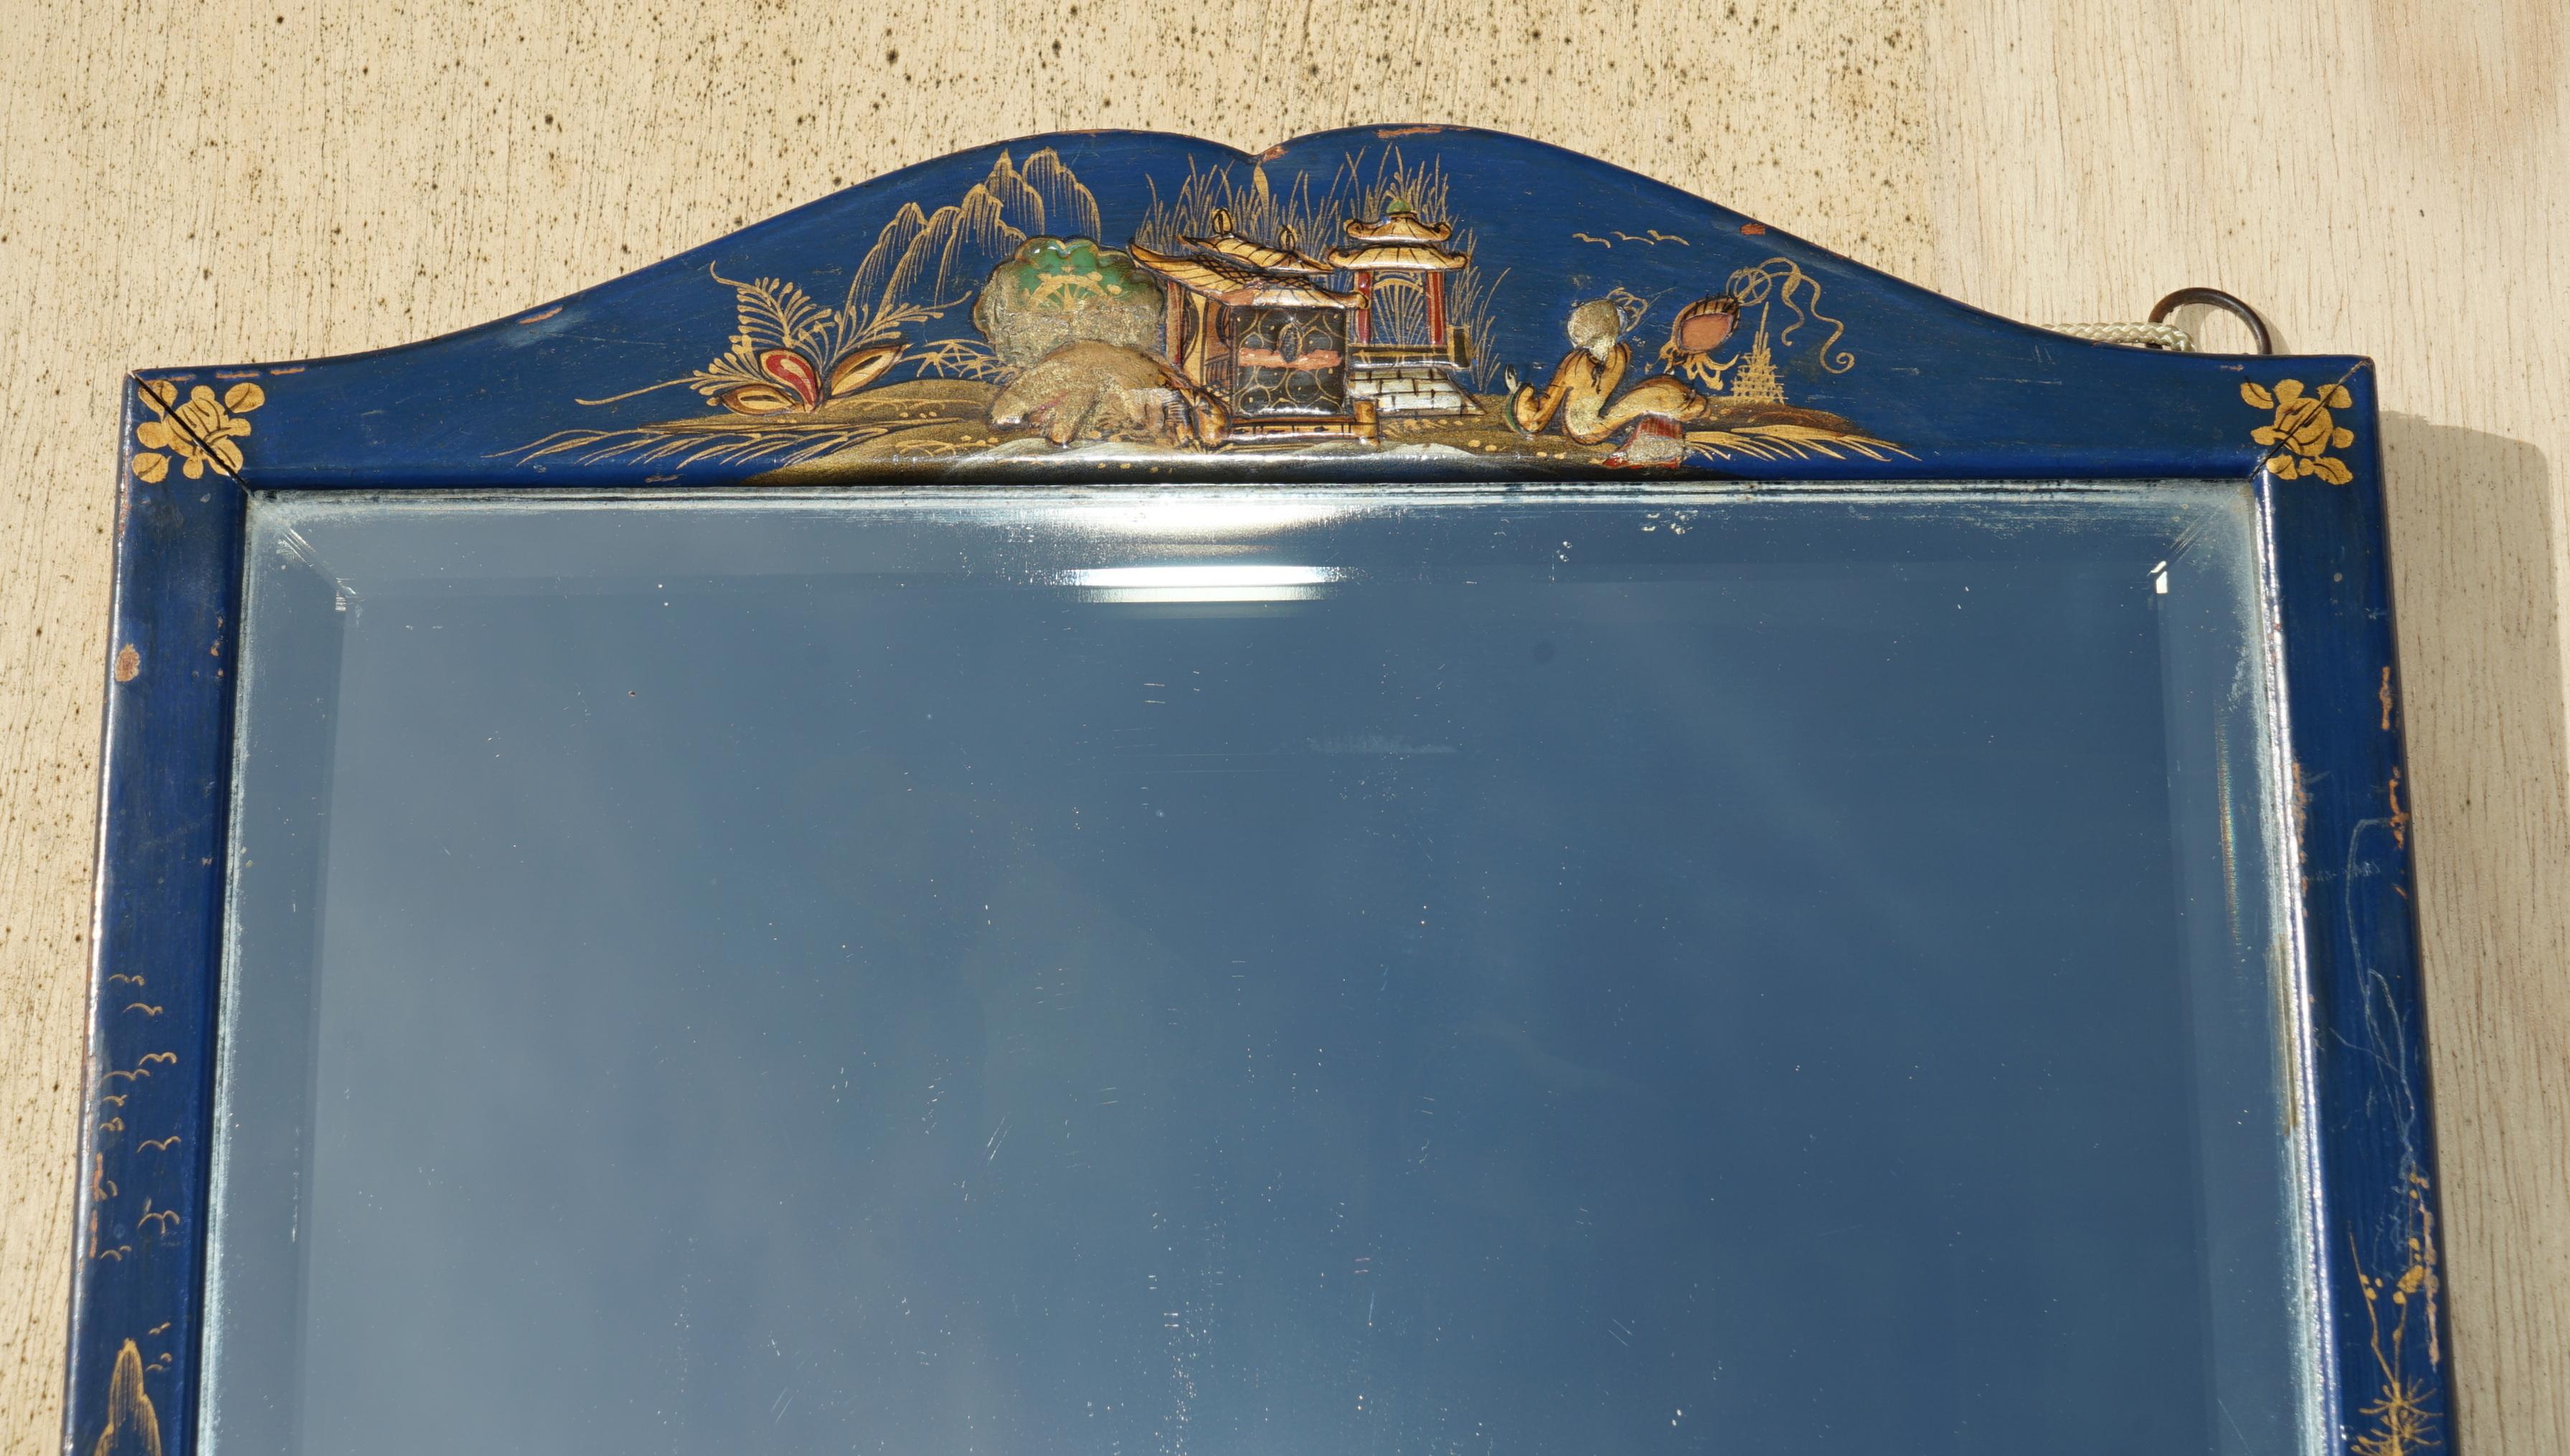 LOVELY ANTIQUE CHiNESE CHINOISERIE BLUE FRAMED MIRROR WITH ORNATE HAND PAINTINGS (Chinoiserie) im Angebot